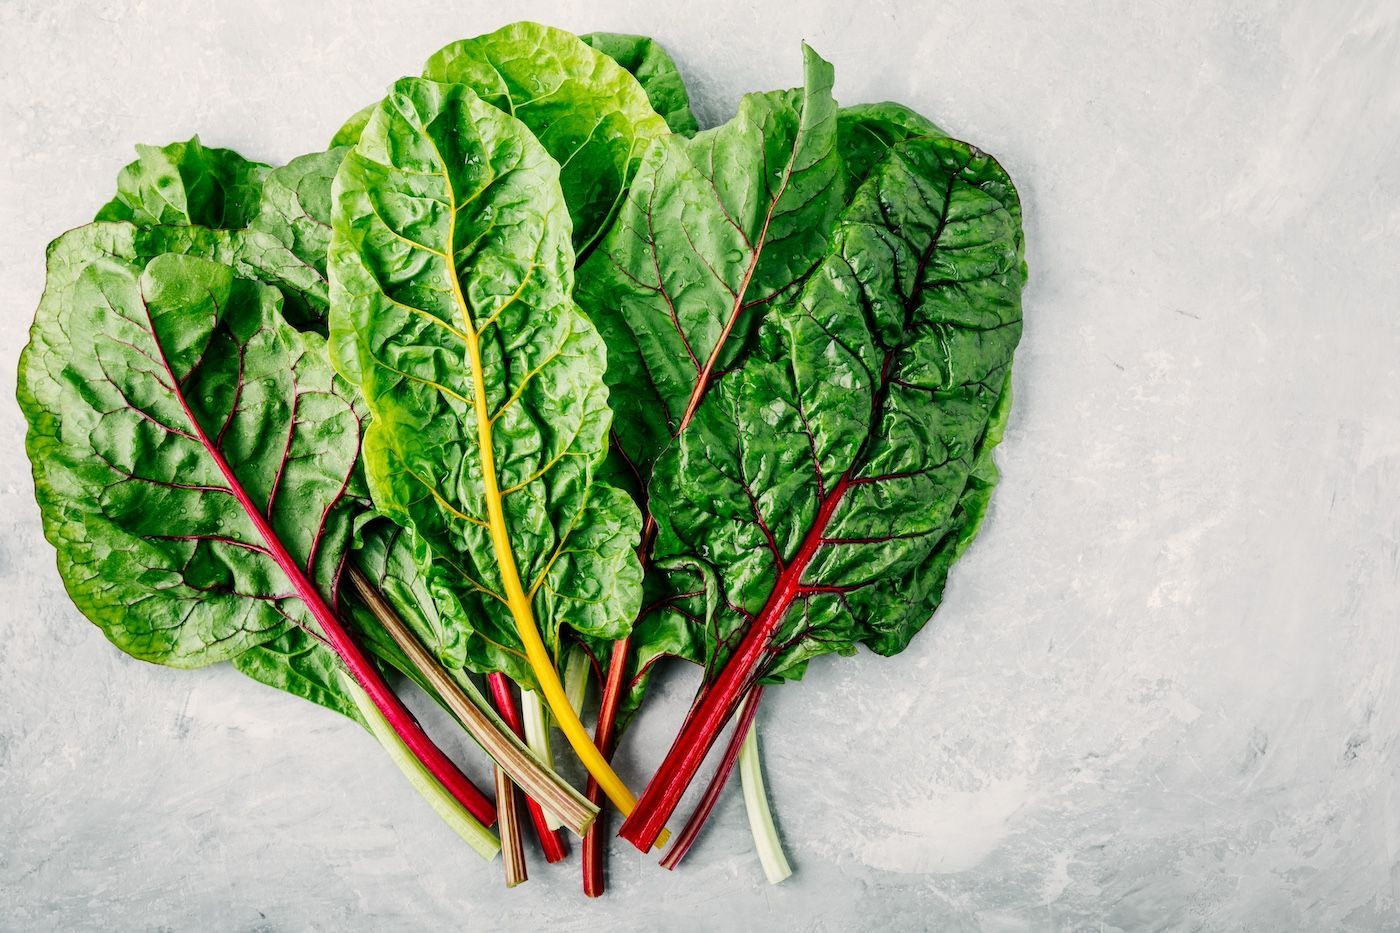 Swiss Chard Is Rich in Anti-inflammatory Antioxidants, Aids Bone Health, & Great for Various Dishes.